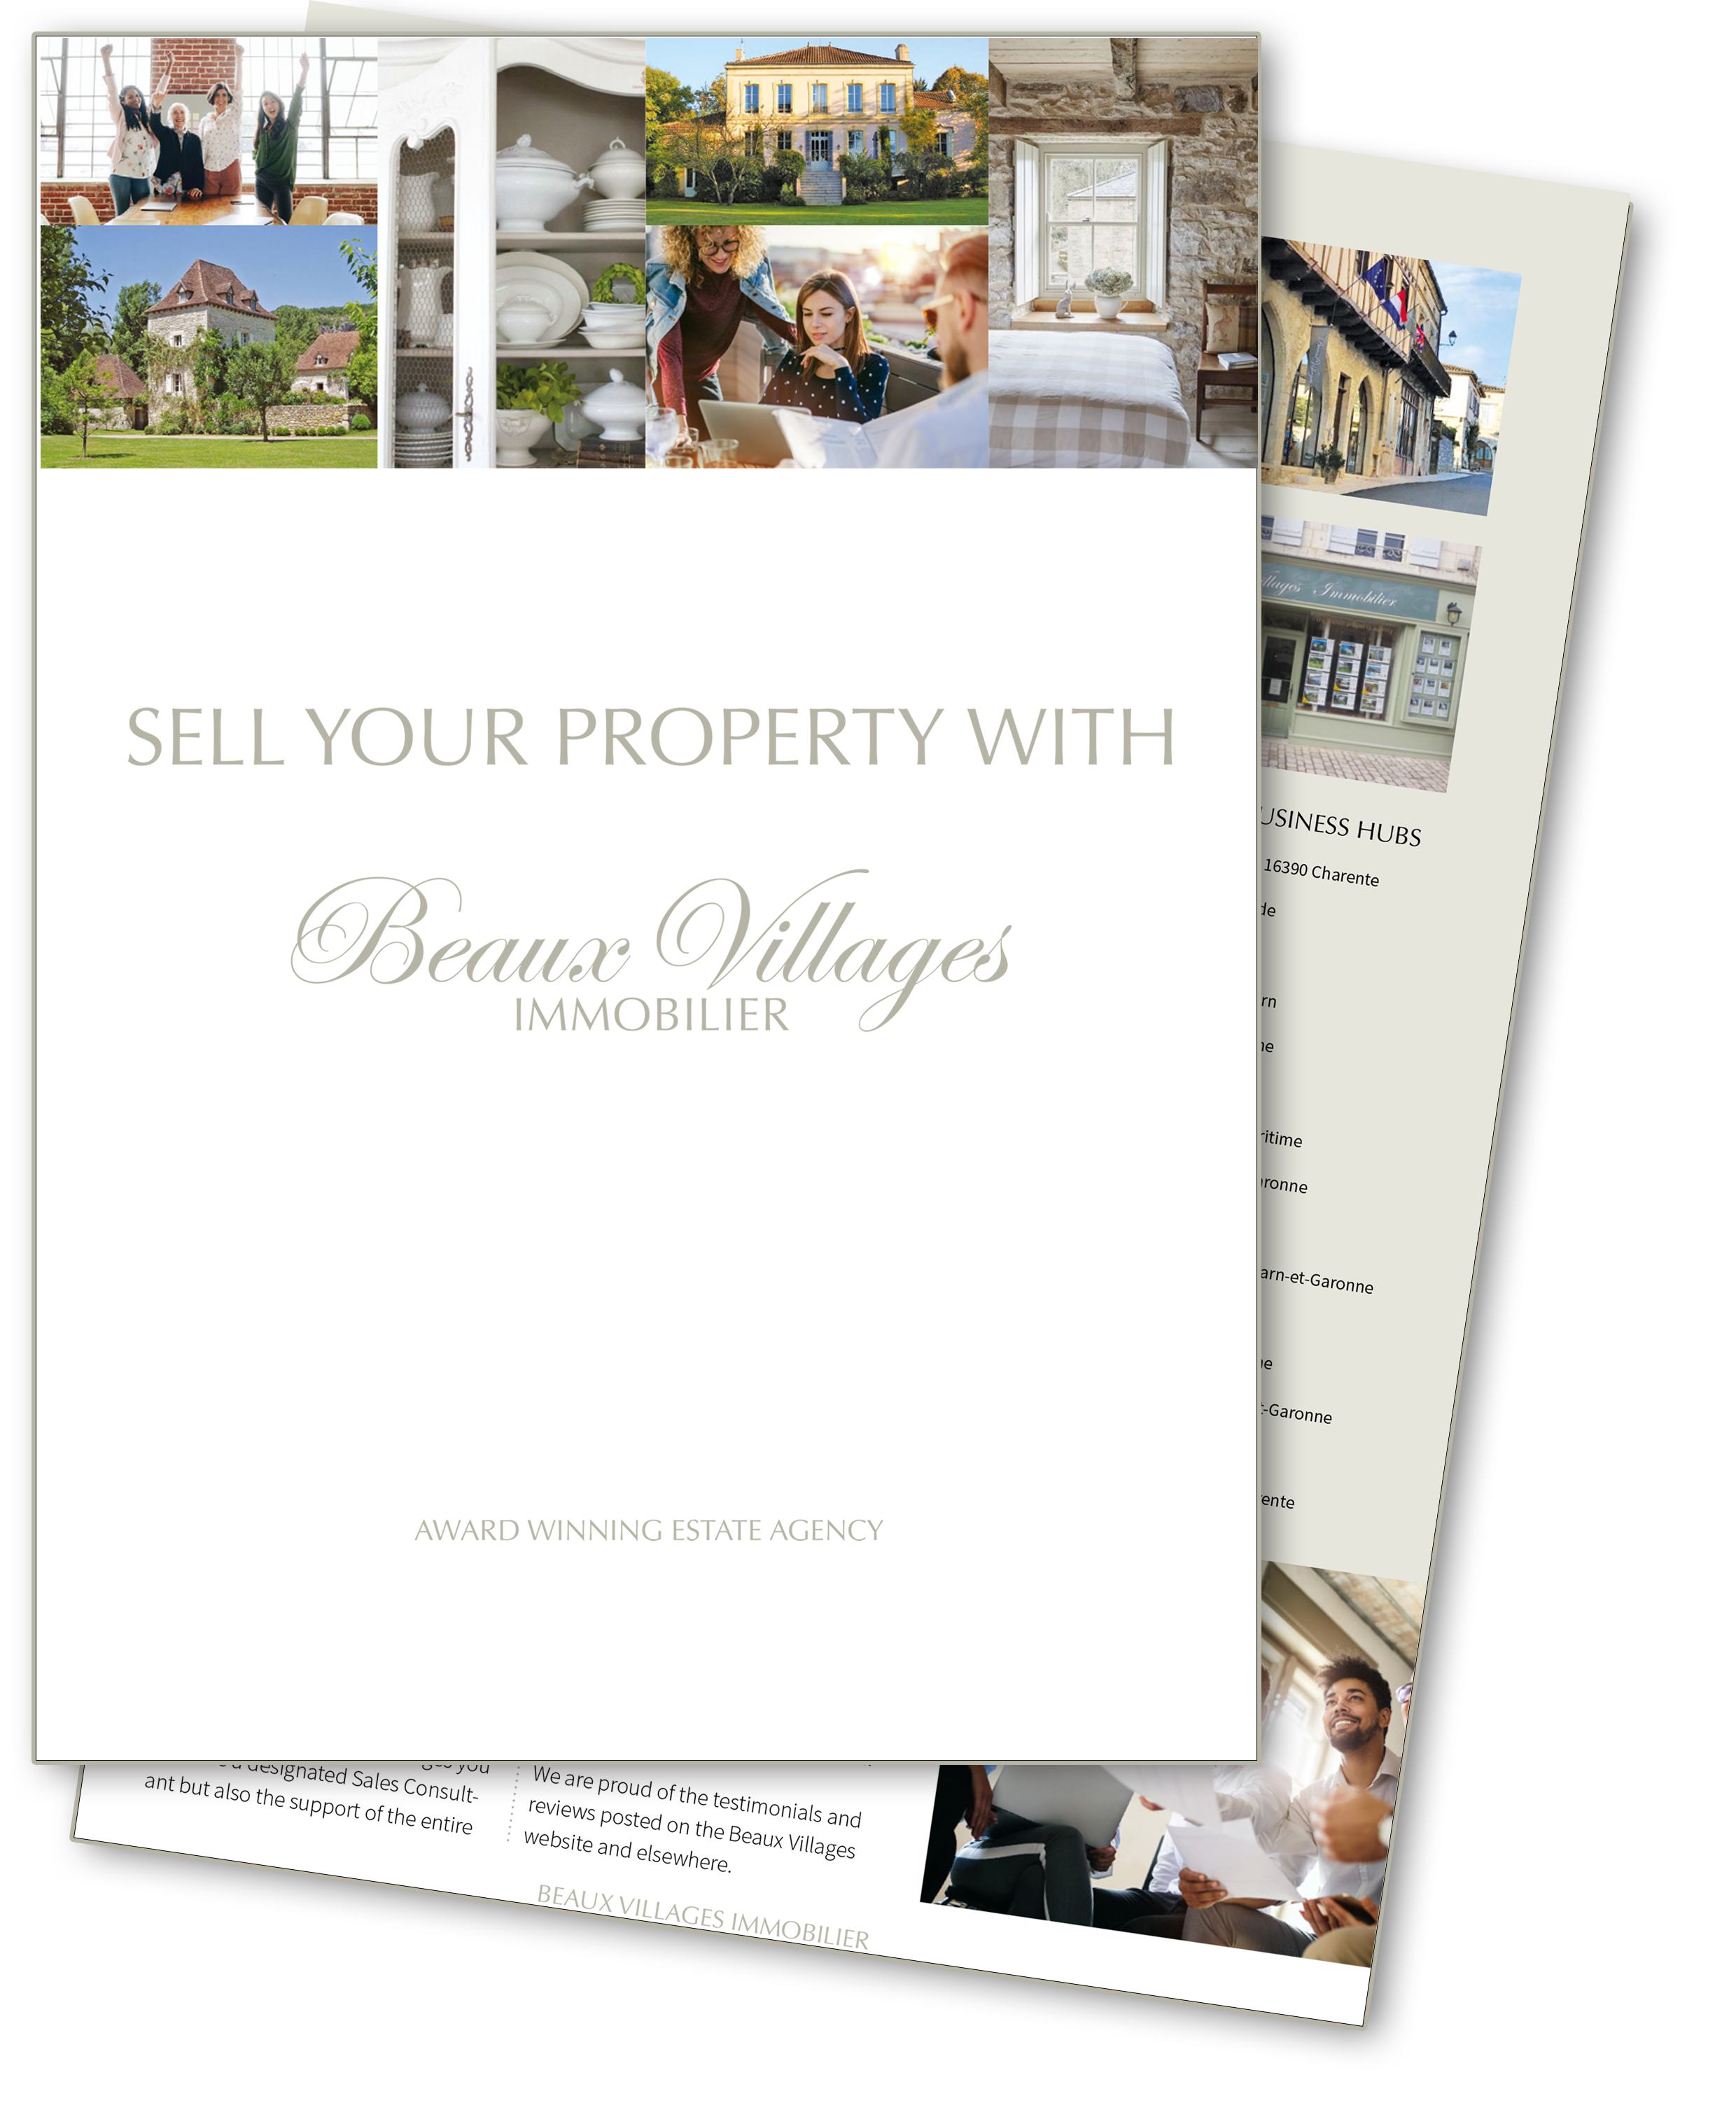 Guide to selling your French property with Beaux Villages Immobilier